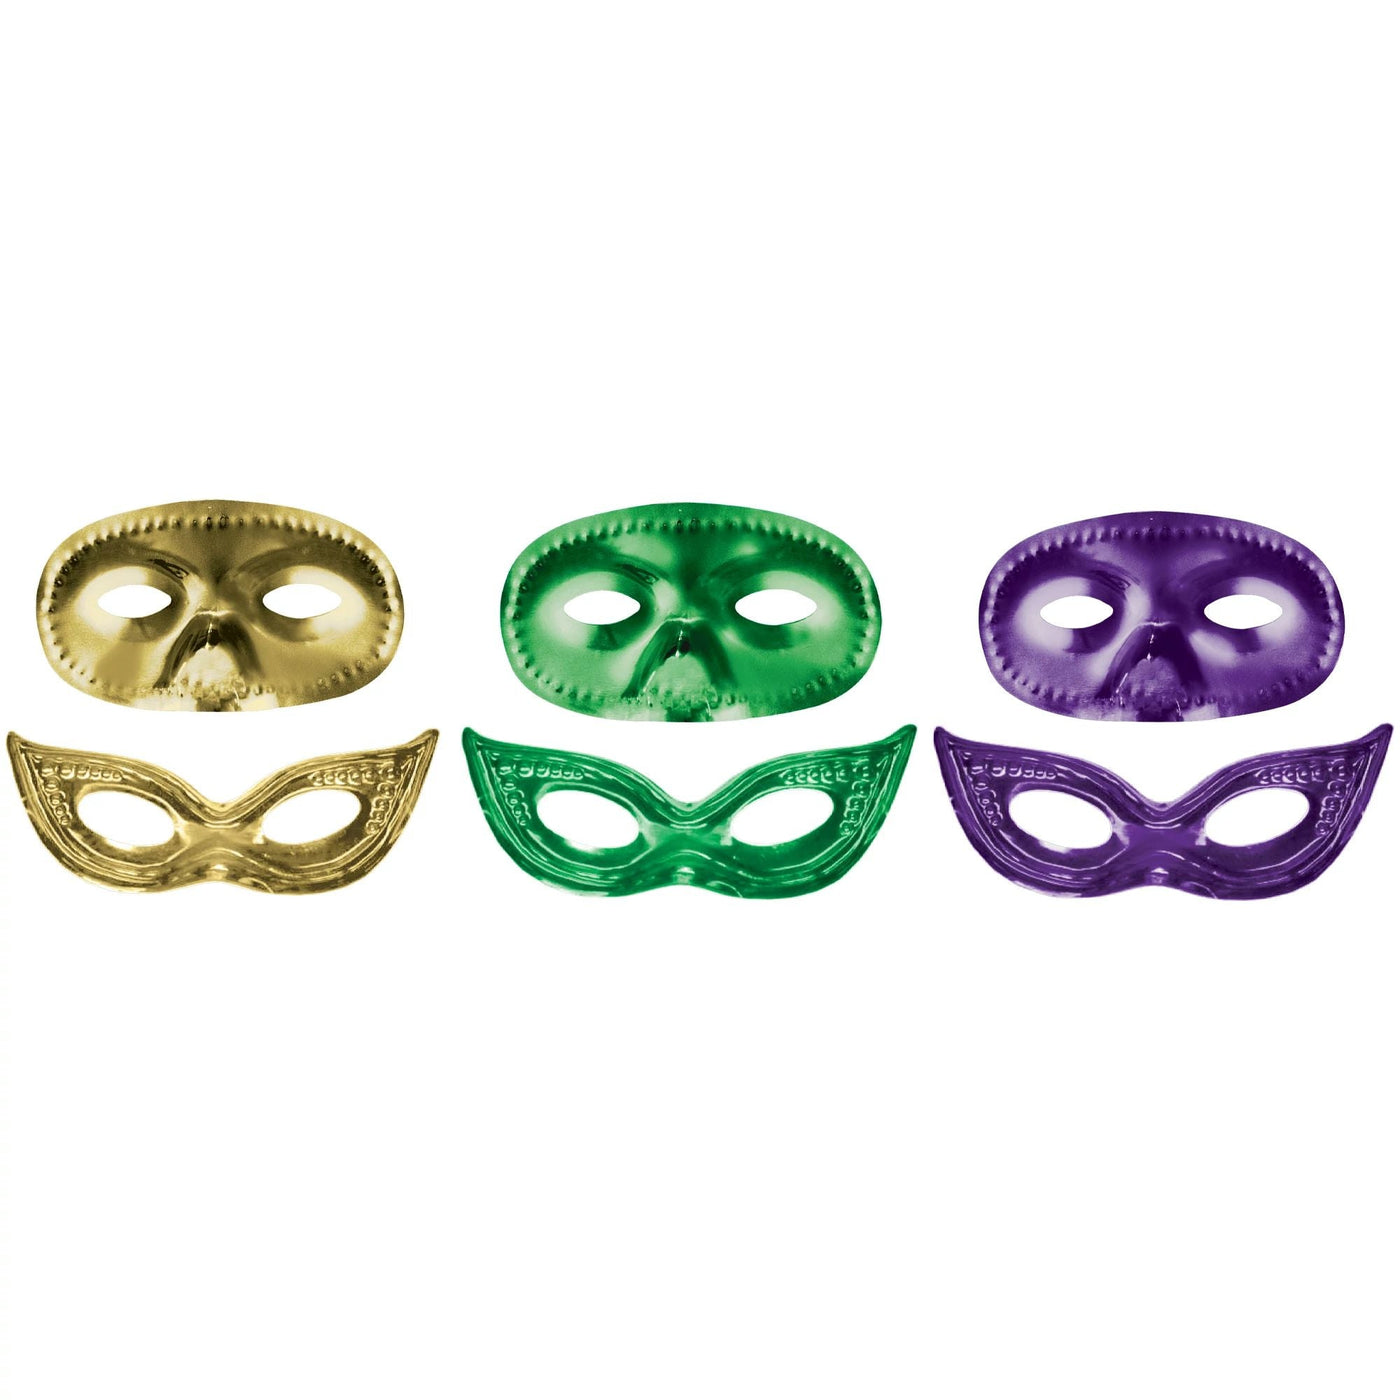 Mardi Gras Metallic Masquerade Masks 12ct - JJ's Party House - Custom Frosted Cups and Napkins